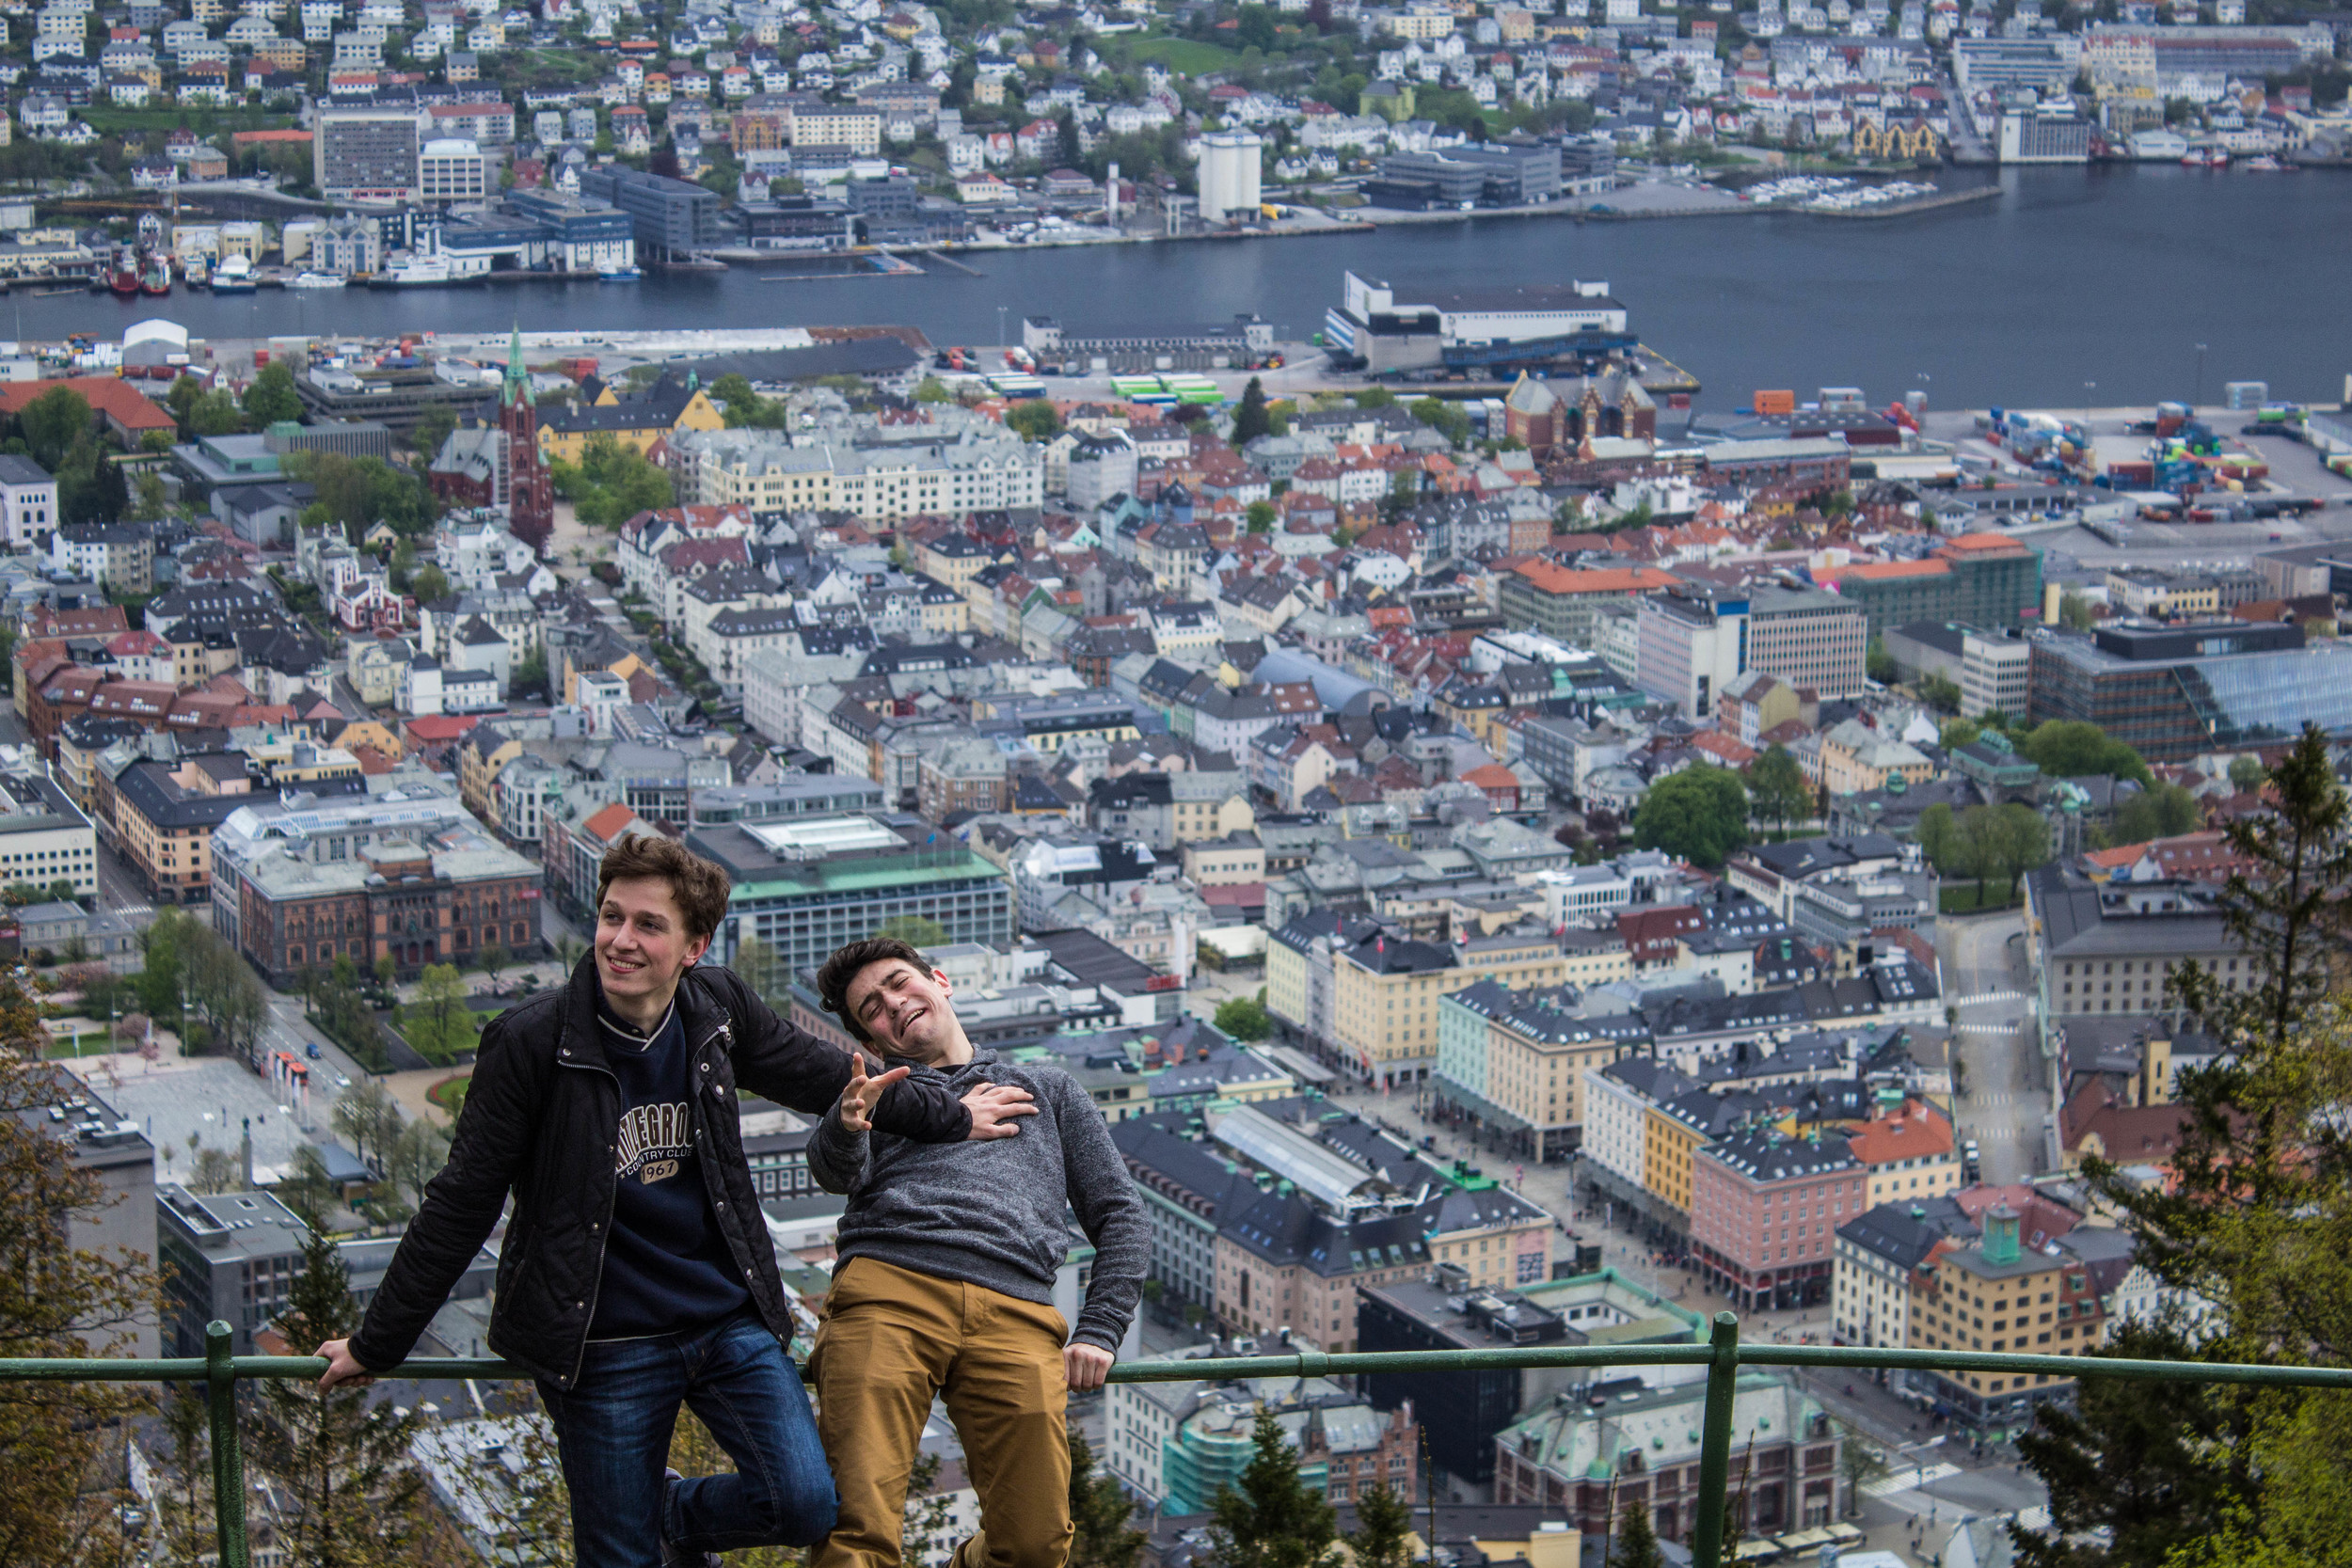 Cat love: pushing each other down fjords (Bergen, Norway)